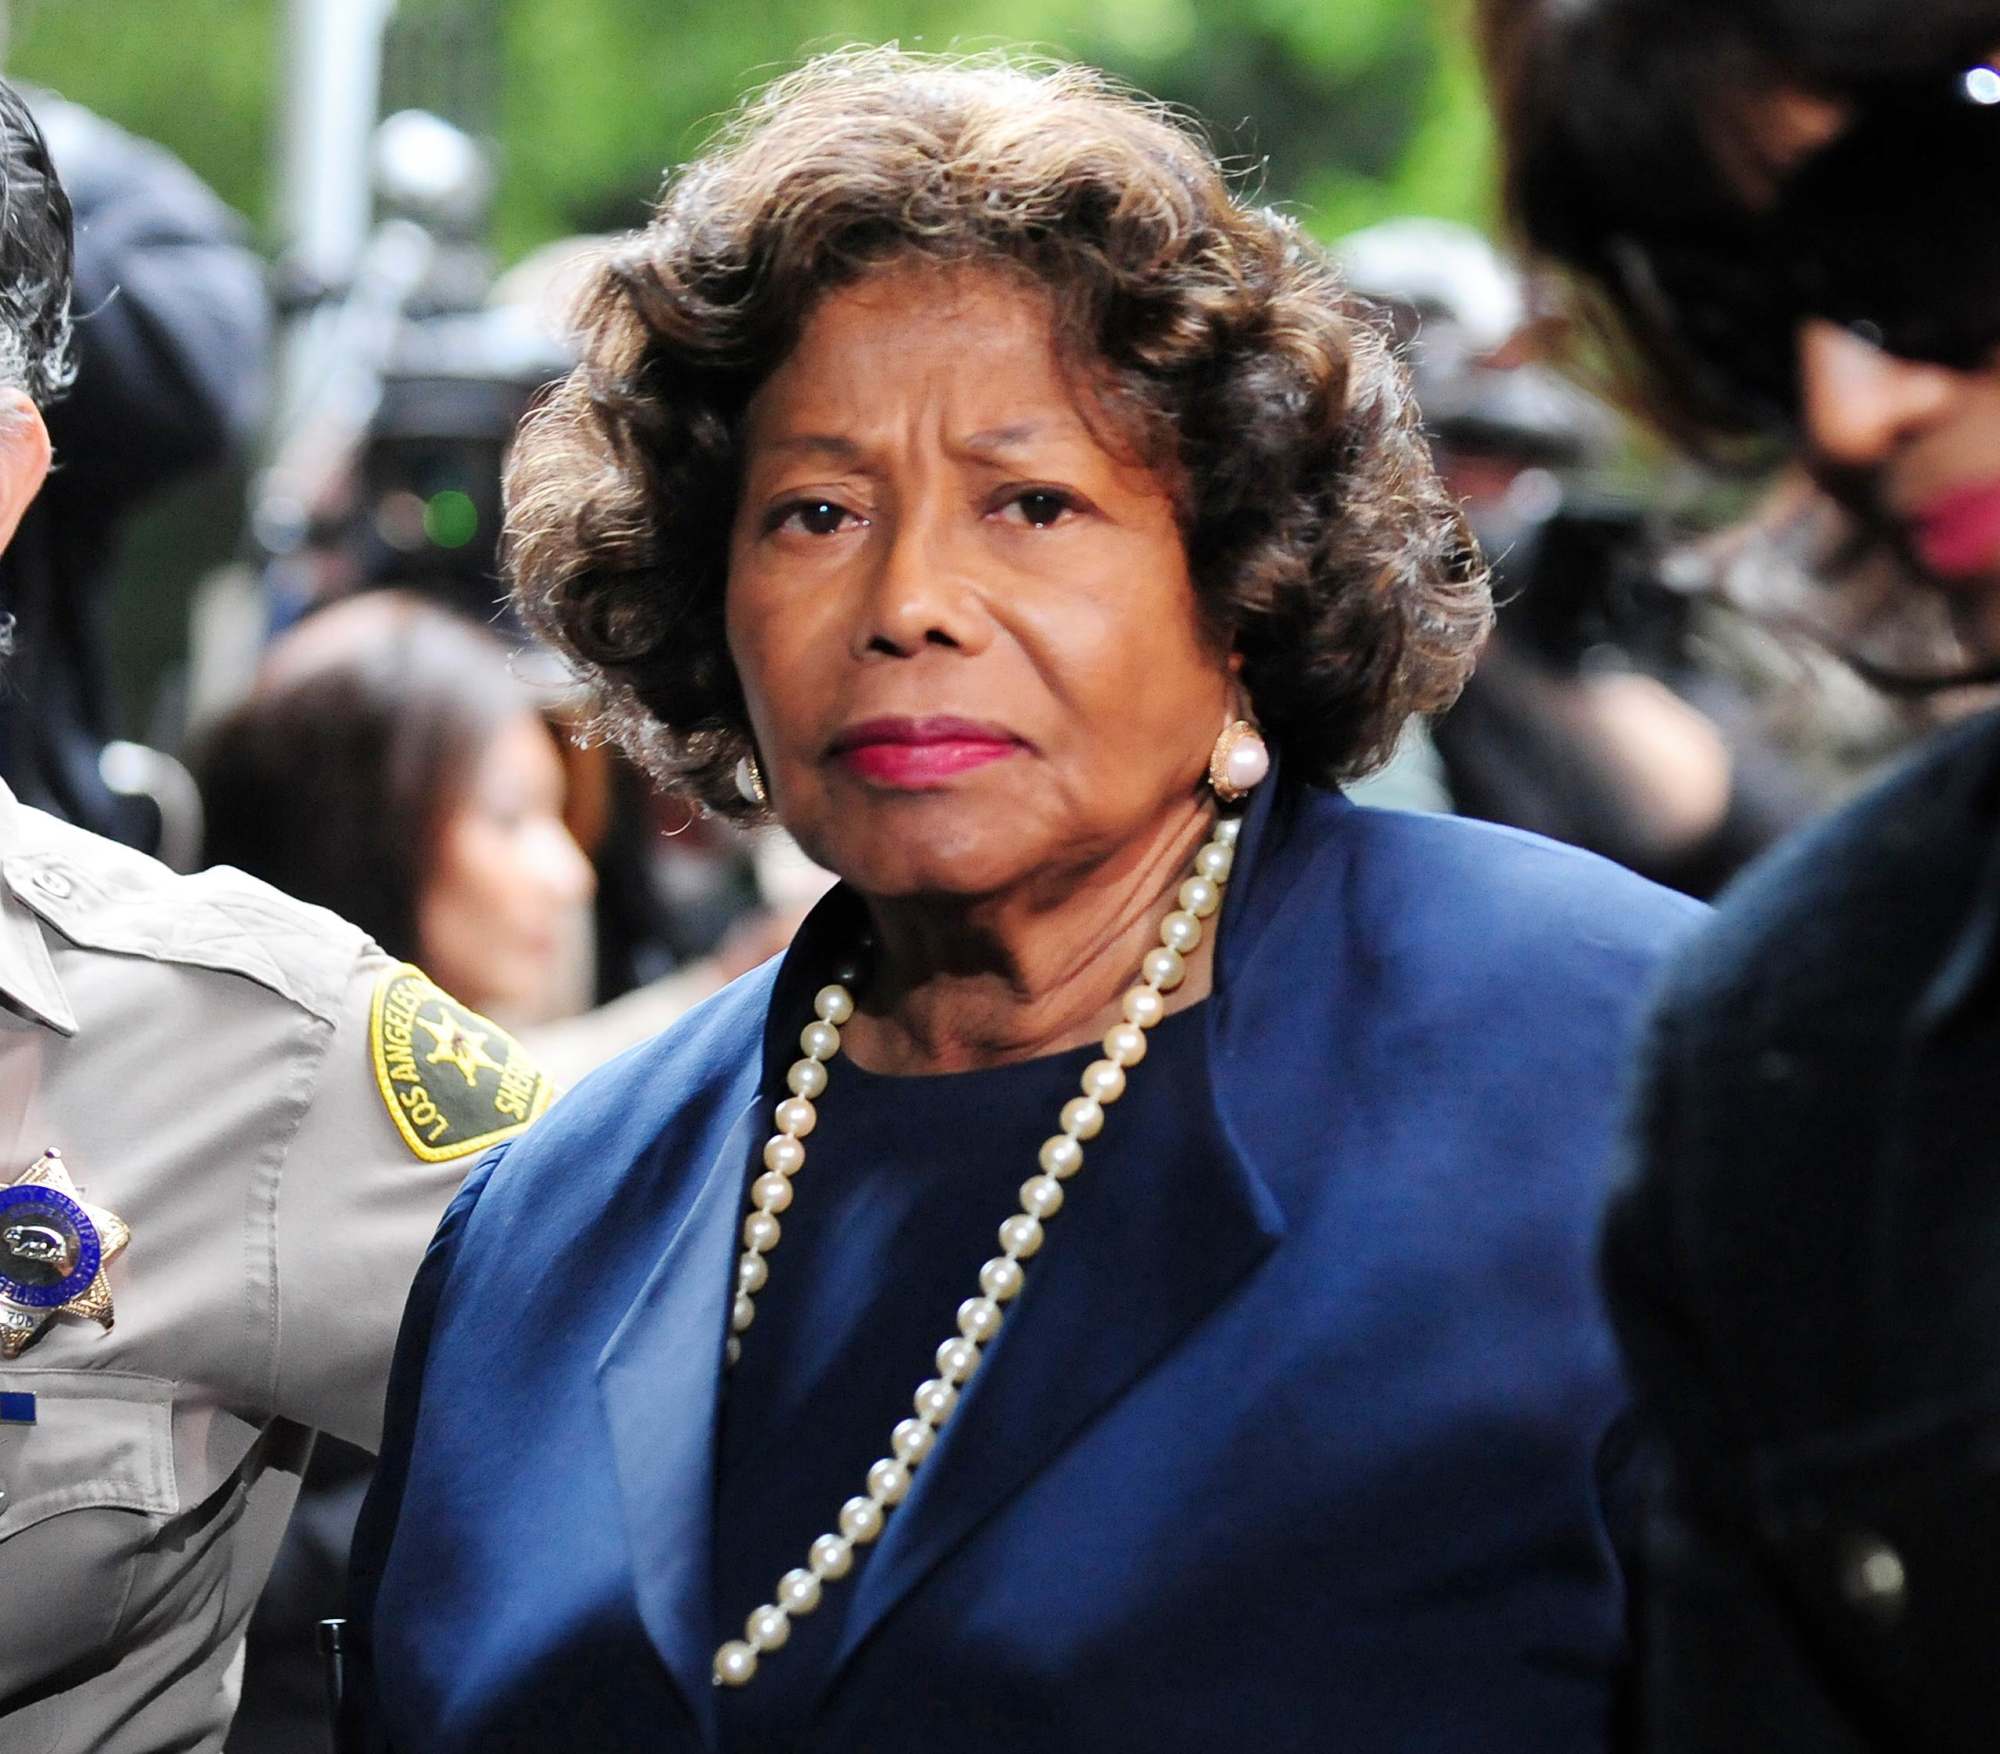 The family’s net worths ranked - Who’s the richest Jackson?   - The late Michael Jackson’s mother, Katherine, arrives at the courthouse for the sentencing of Dr. Conrad Murray. Photo: AFP